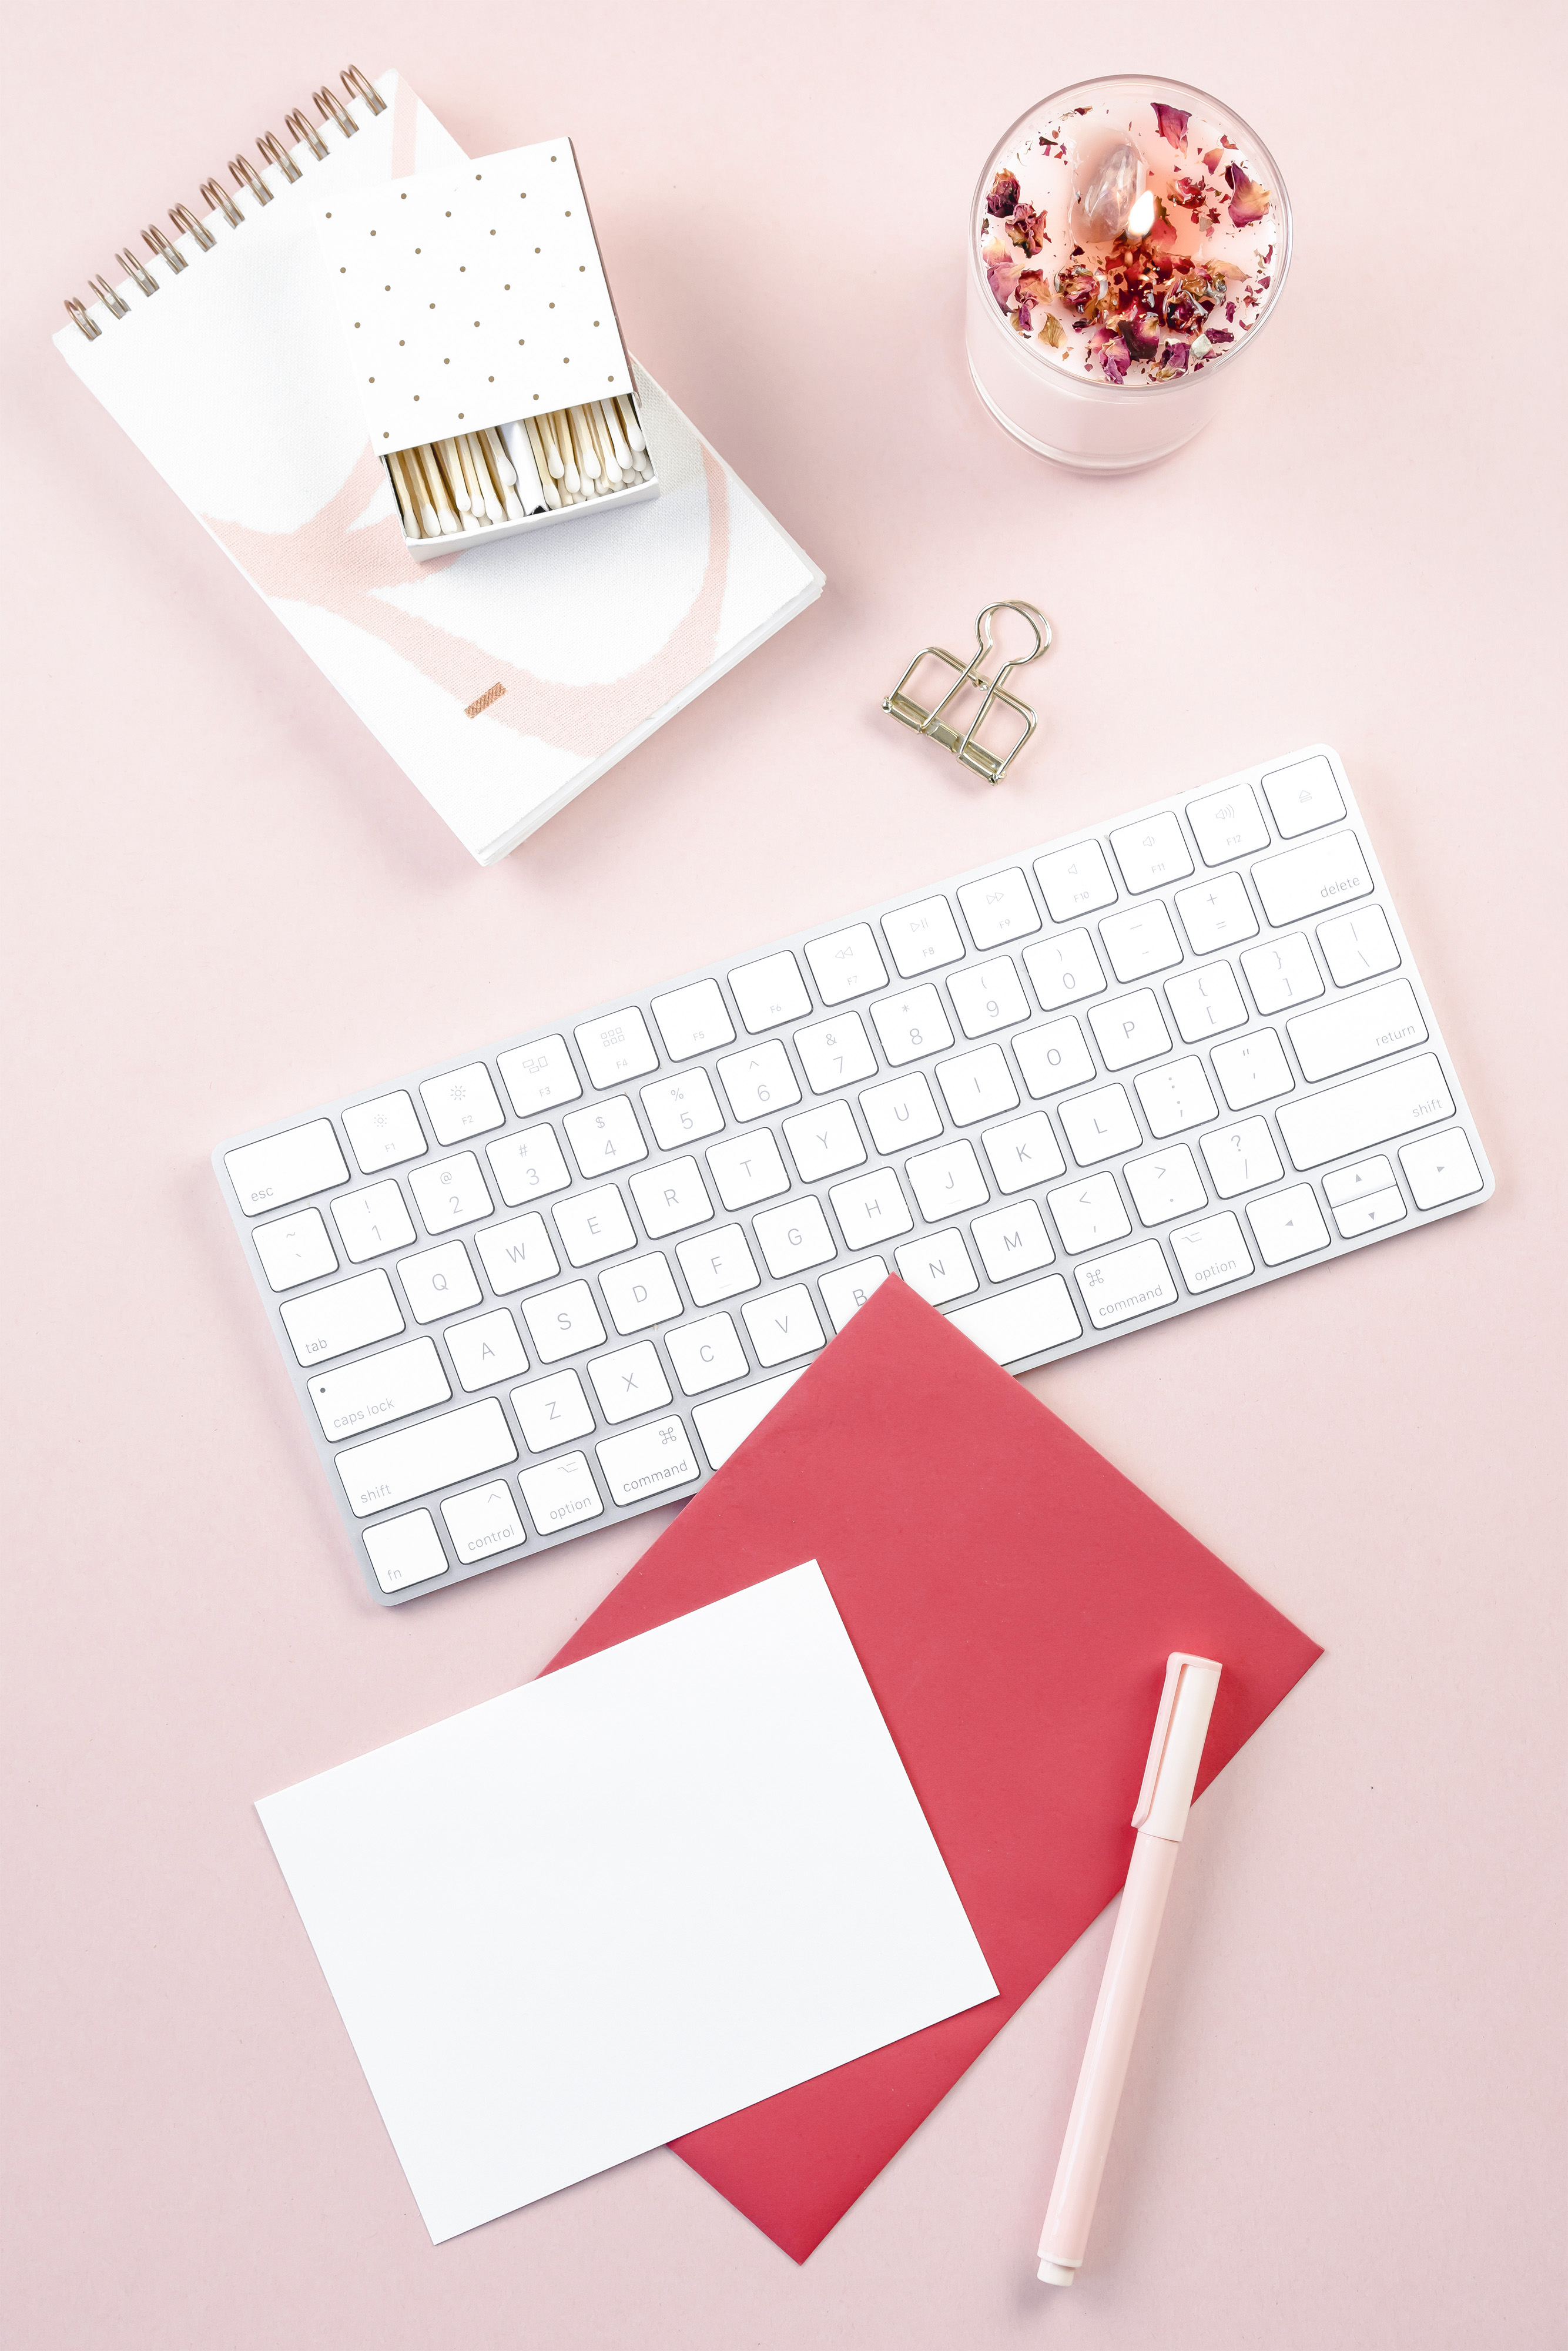 Top 5 Productivity Tools For Busy Boss Babes